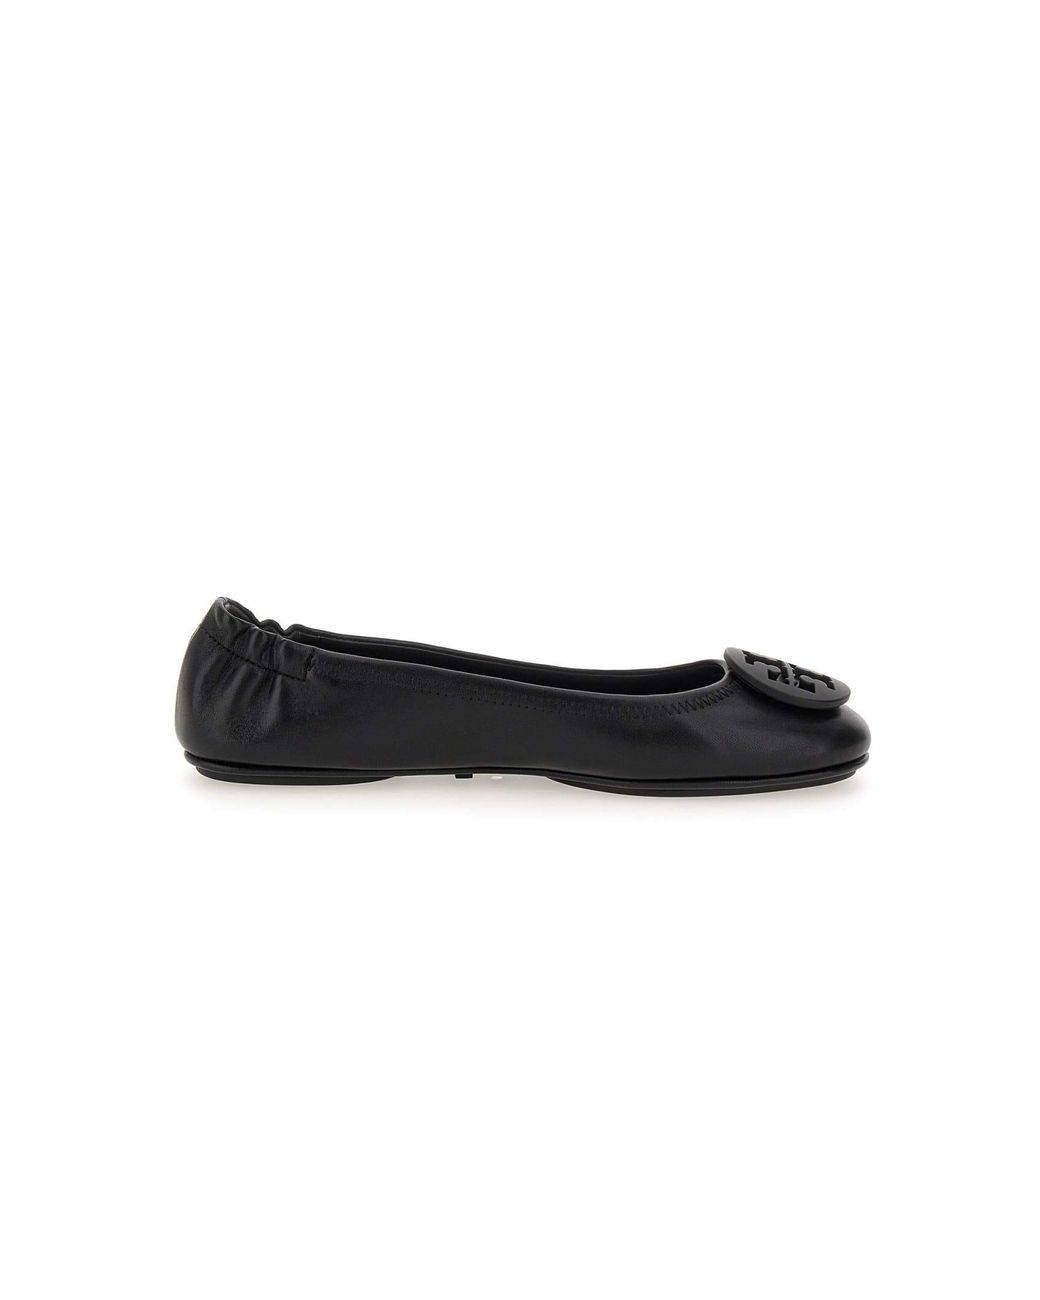 Tory Burch Minnie Travel Ballet Flats Leather in Black | Lyst